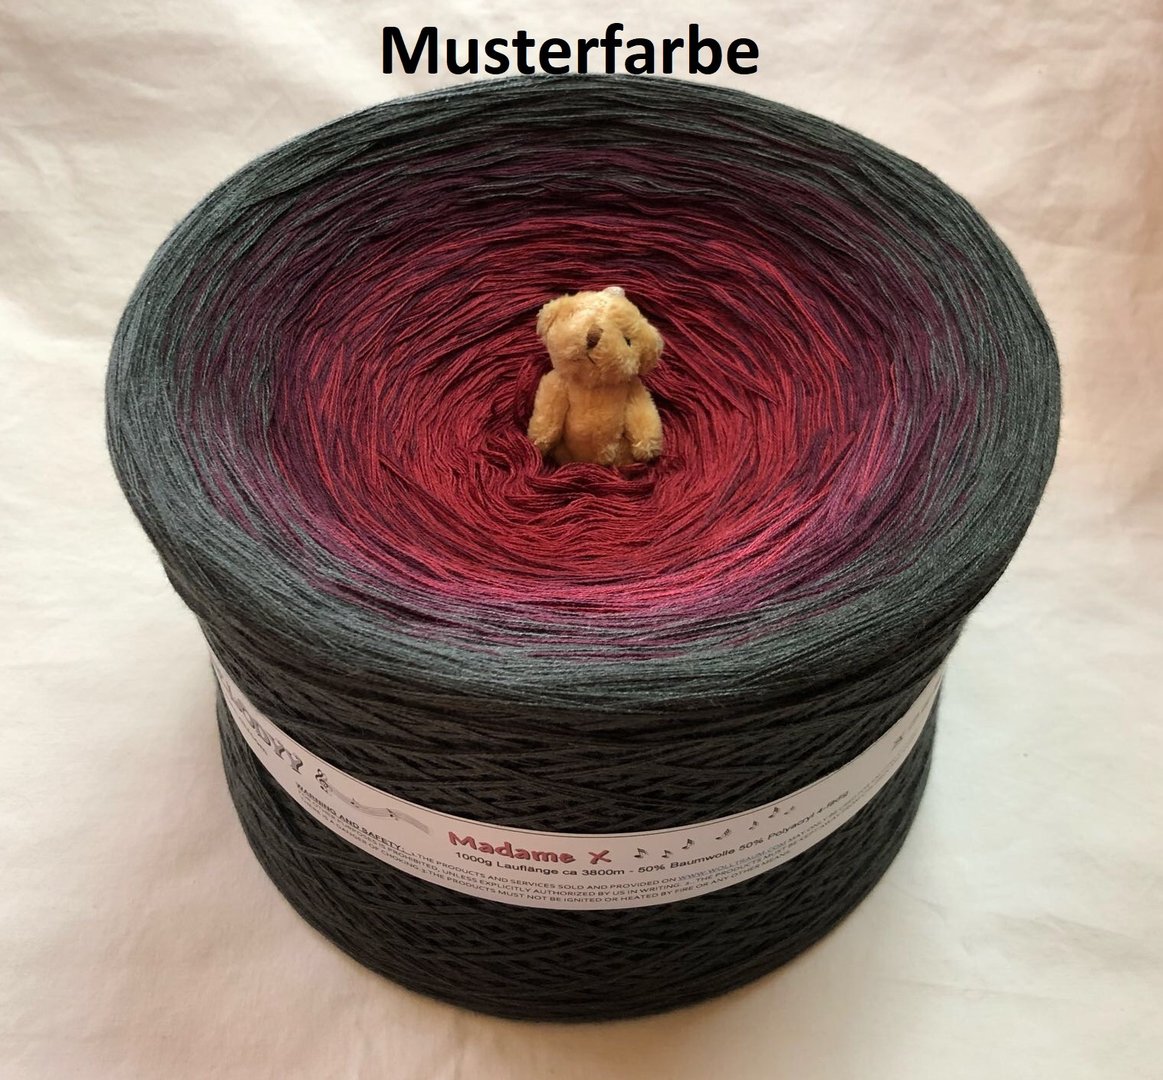 A 1 kilogram Wolltraum yarn cake with red in the middle and black on the outside.  There is a small bear in the middle of the cake.